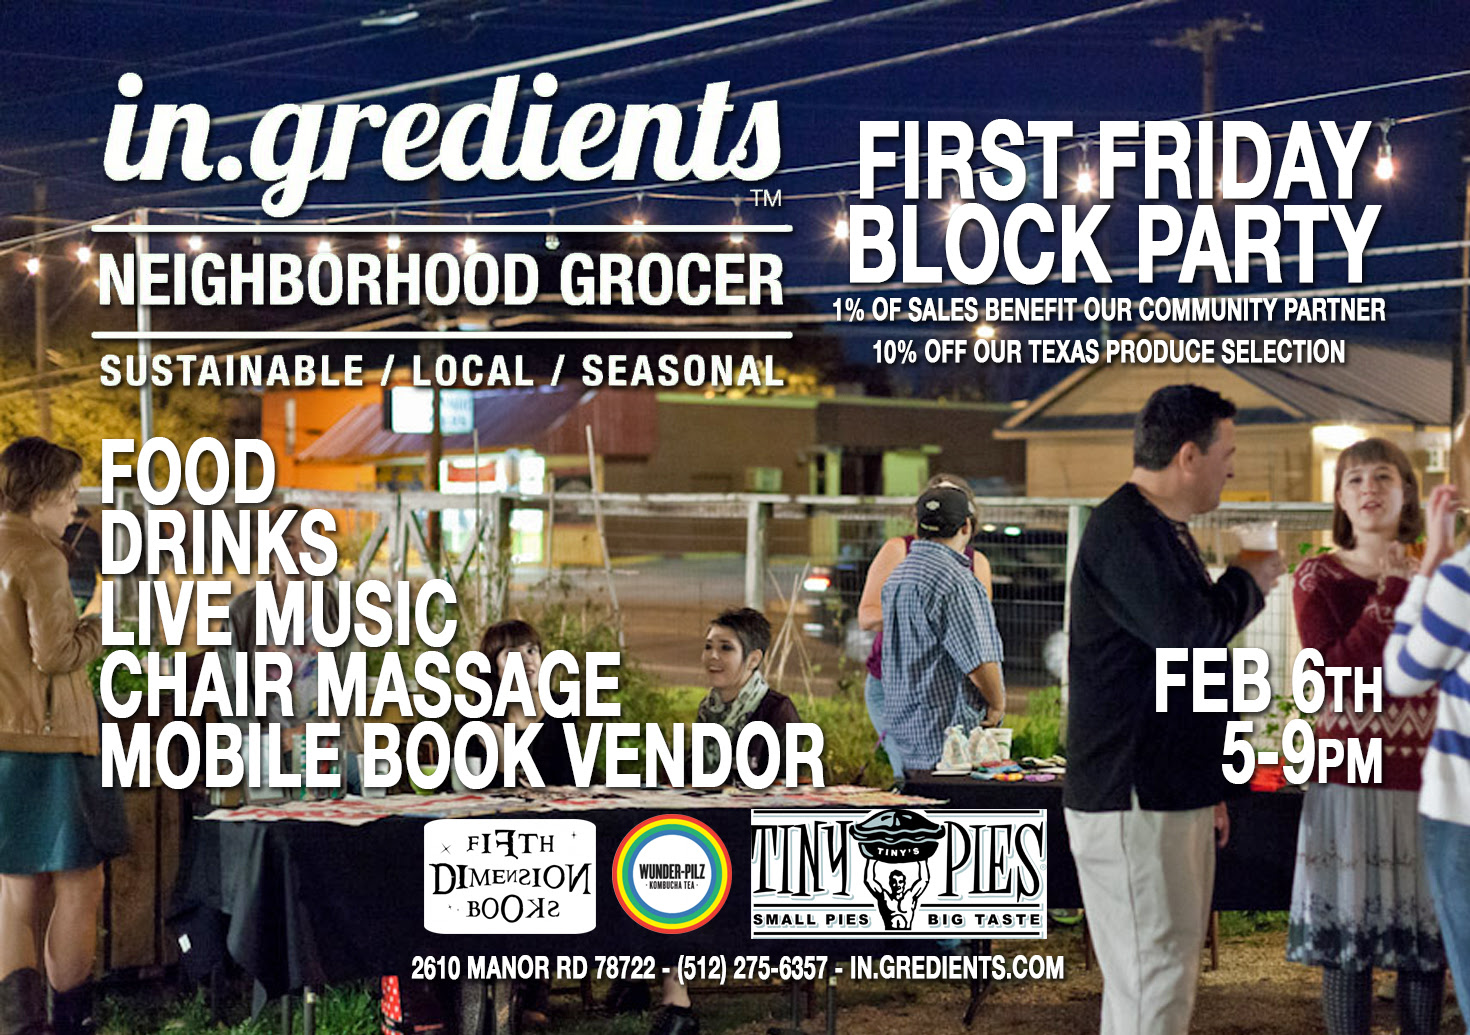 In.gredients is having a block party this Friday.